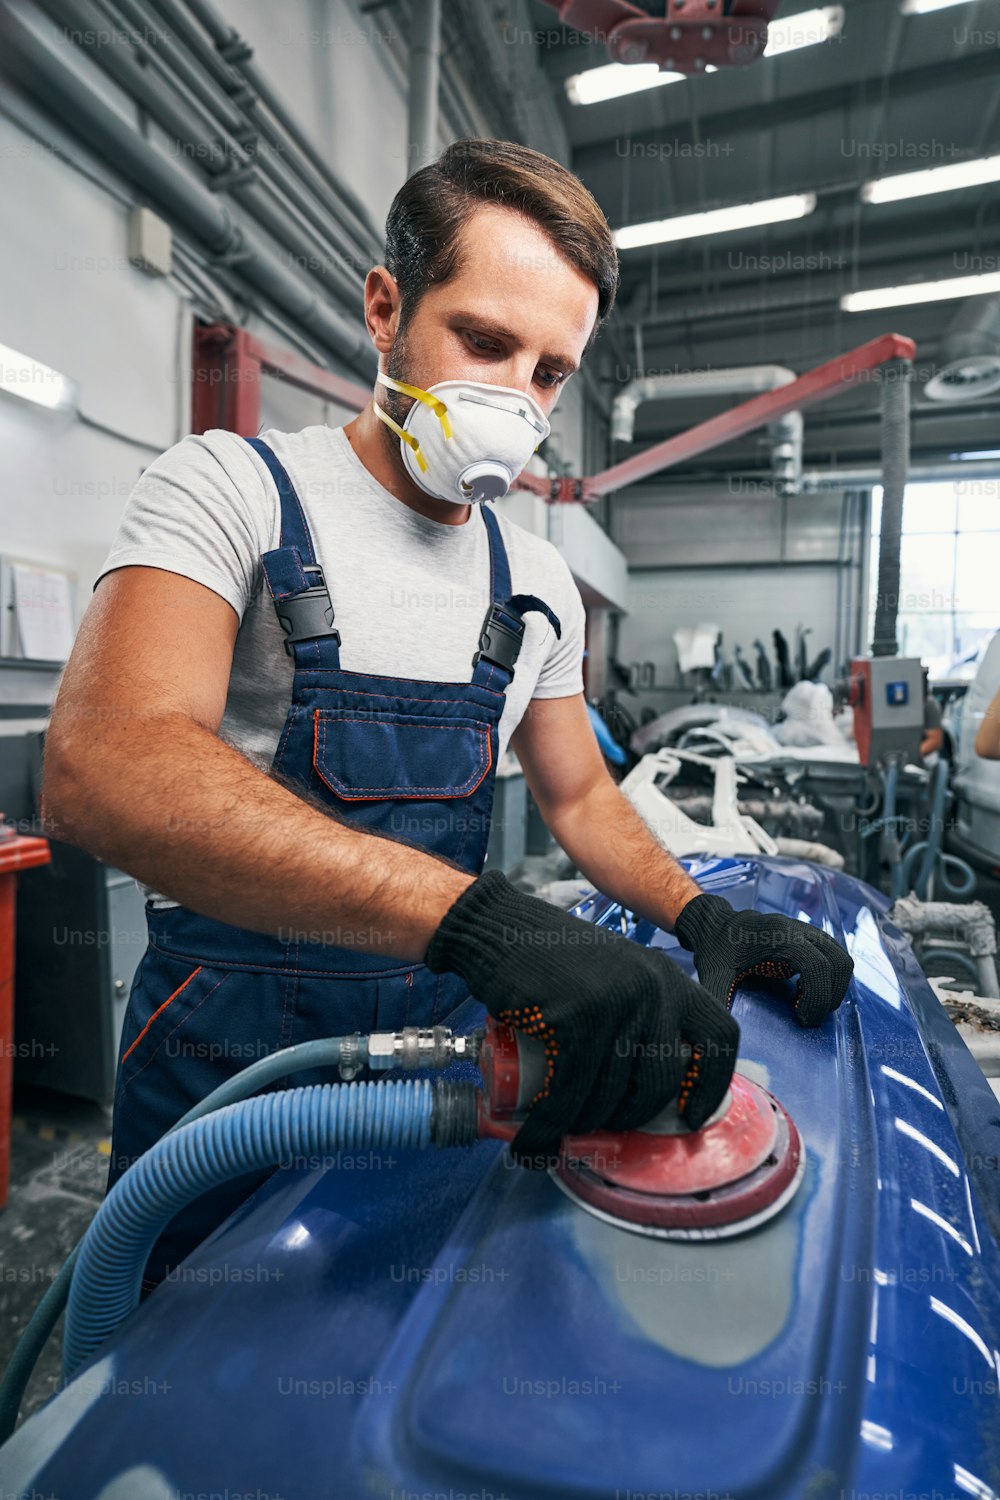 Automotive technician wearing blue overalls and breathing mask grinding part of automobile with sander in workshop